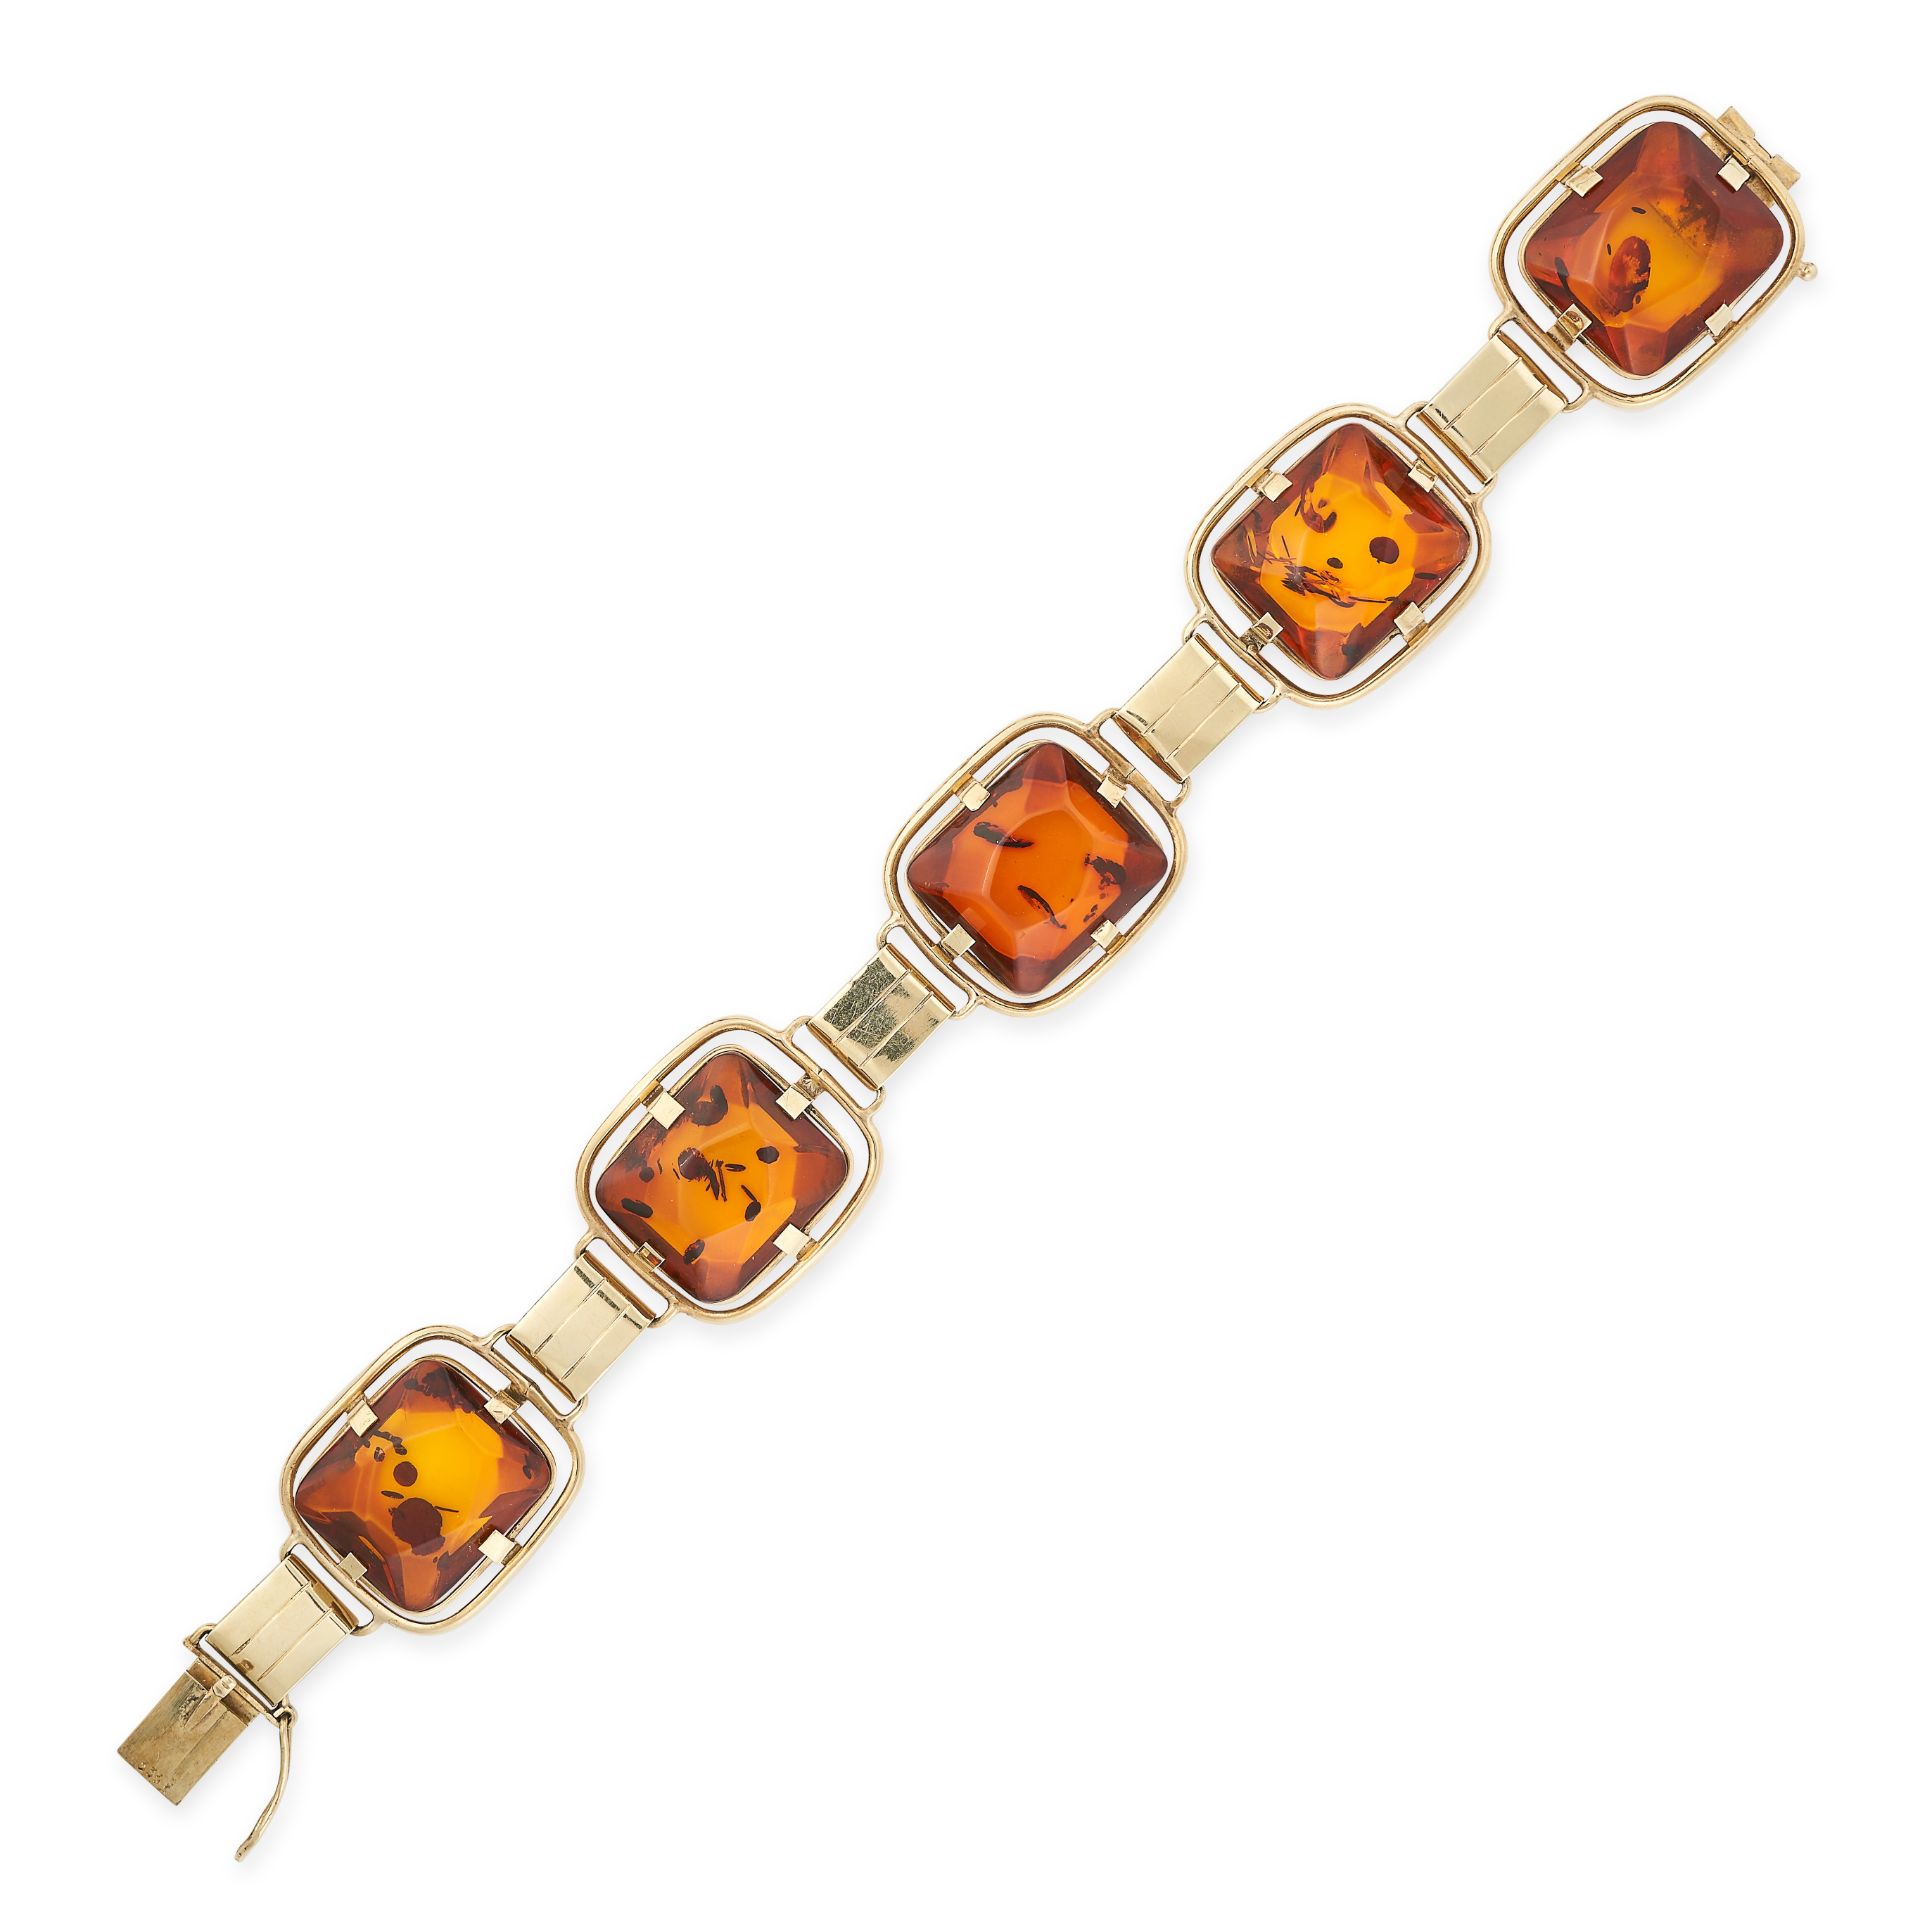 A VINTAGE AMBER BRACELET in yellow gold, set with five pieces of polished amber accented by gold